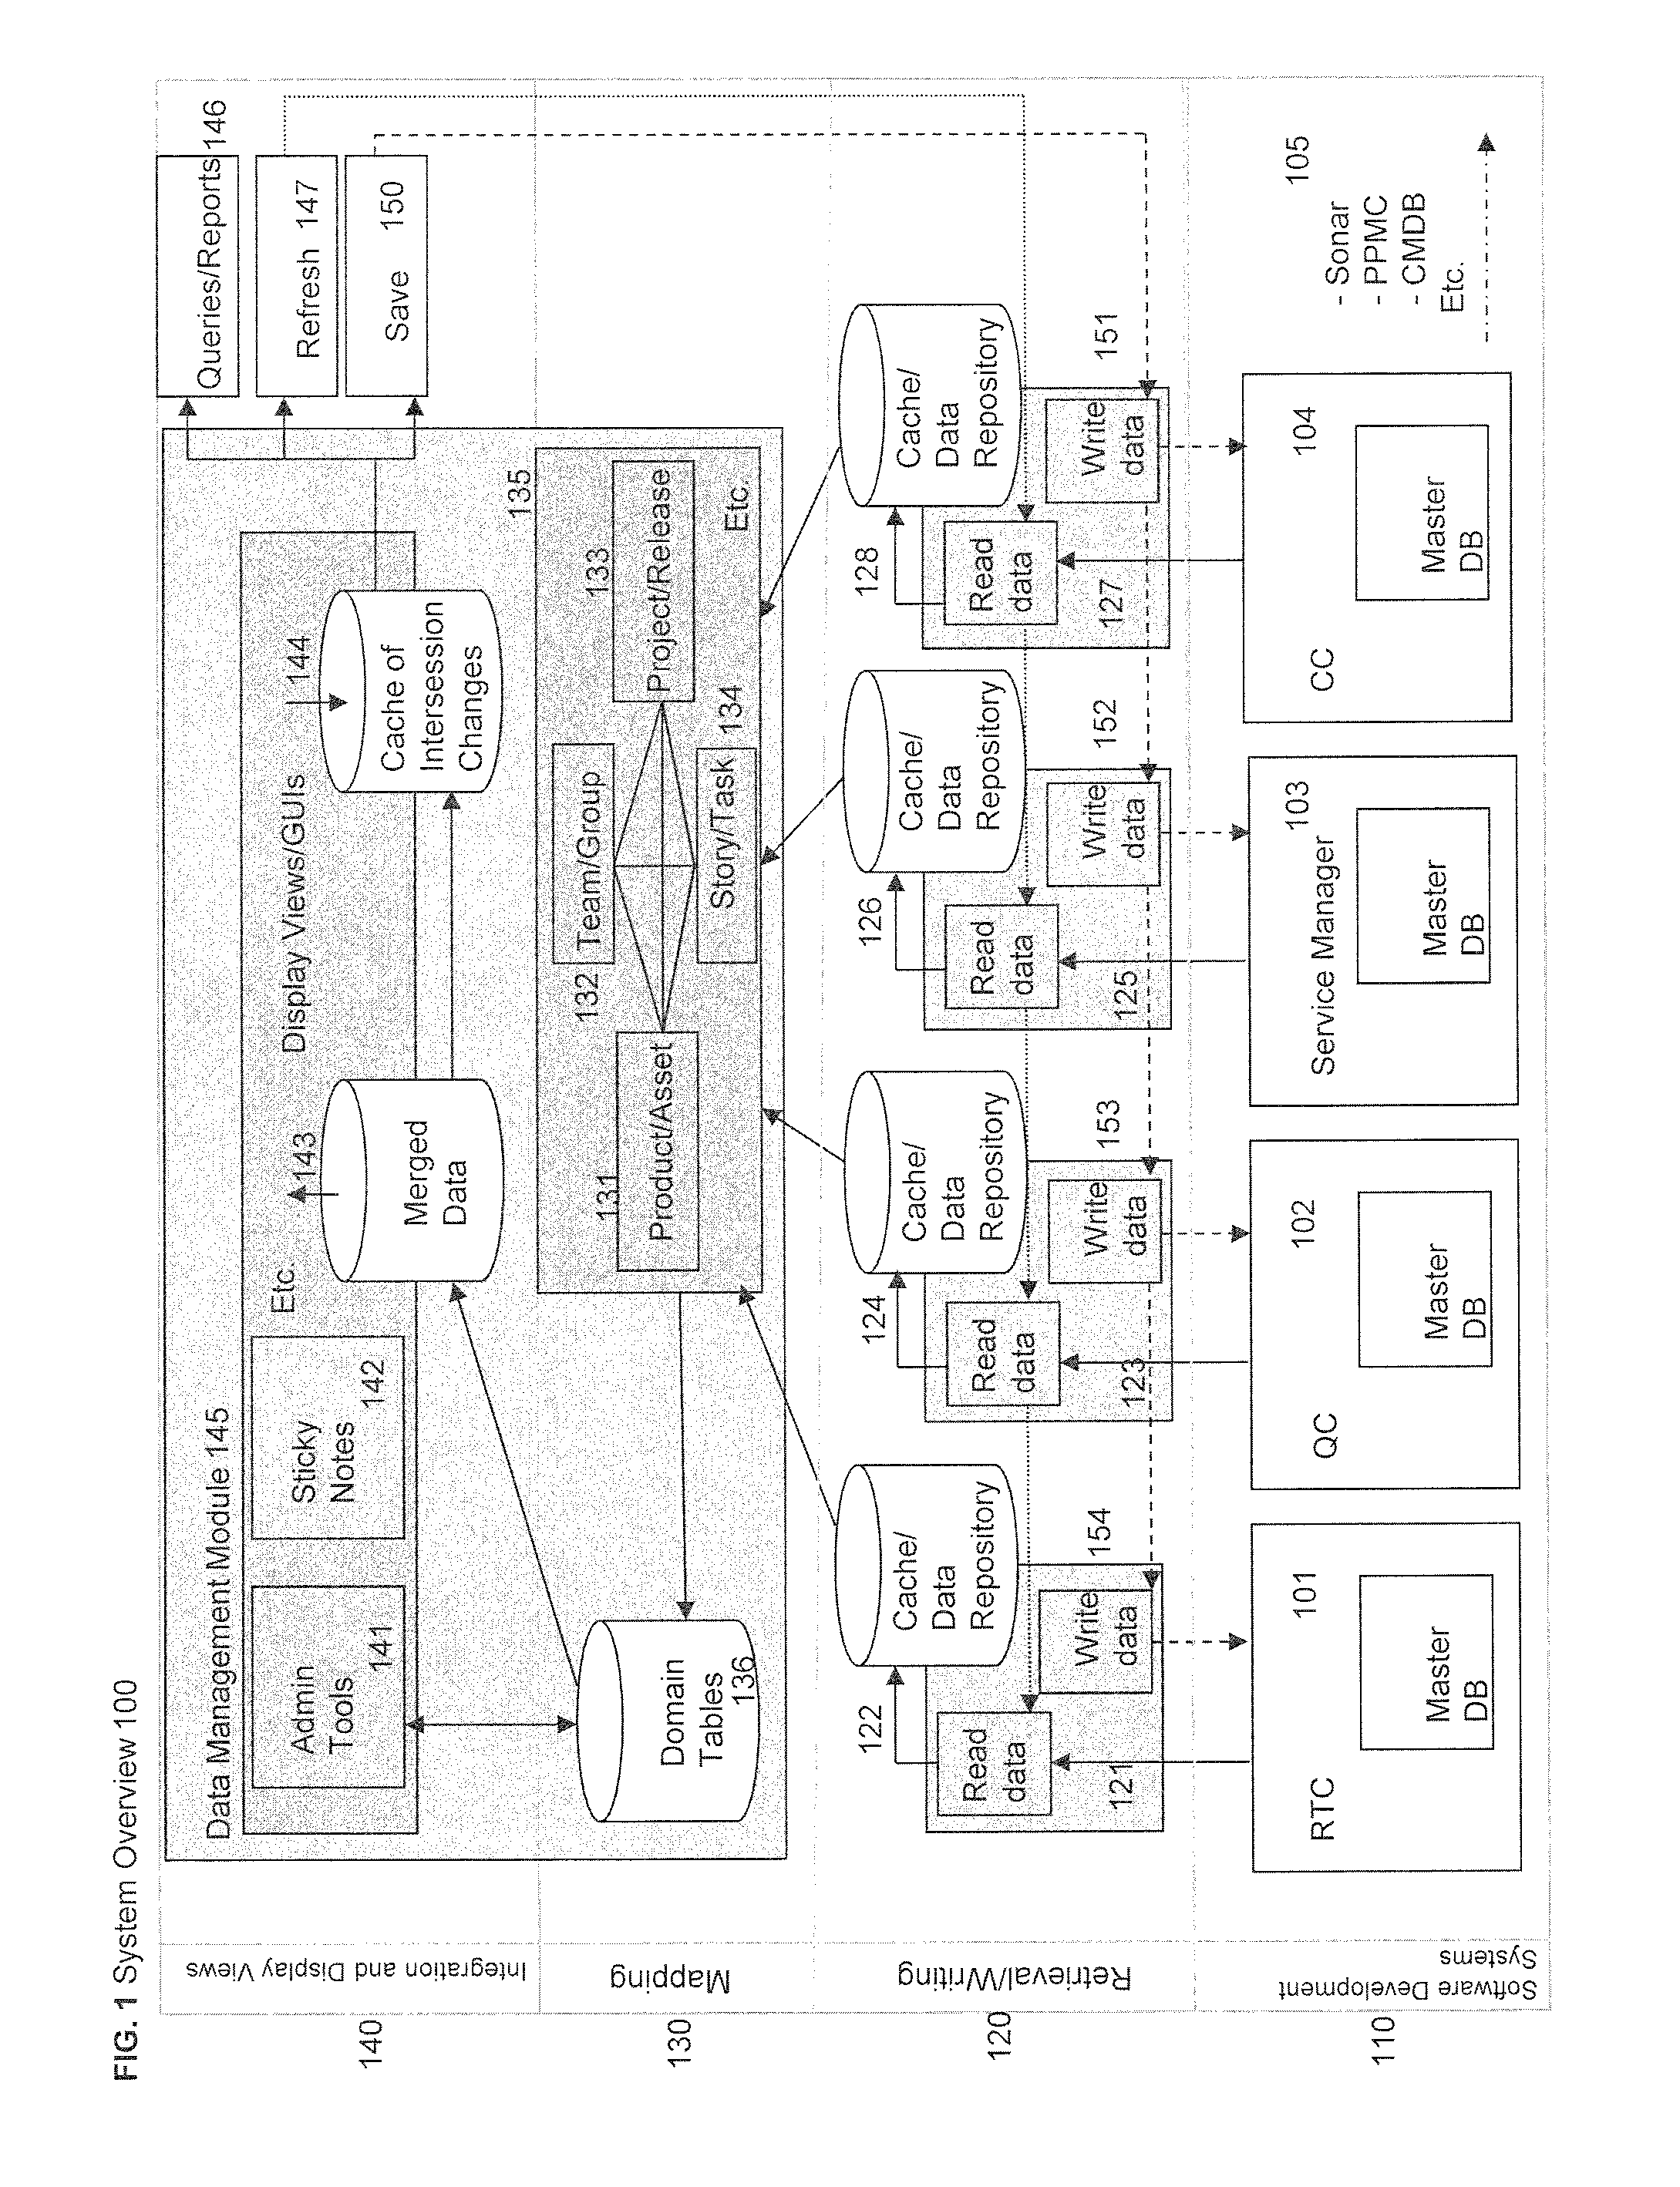 System and method for providing access to data in a plurality of software development systems